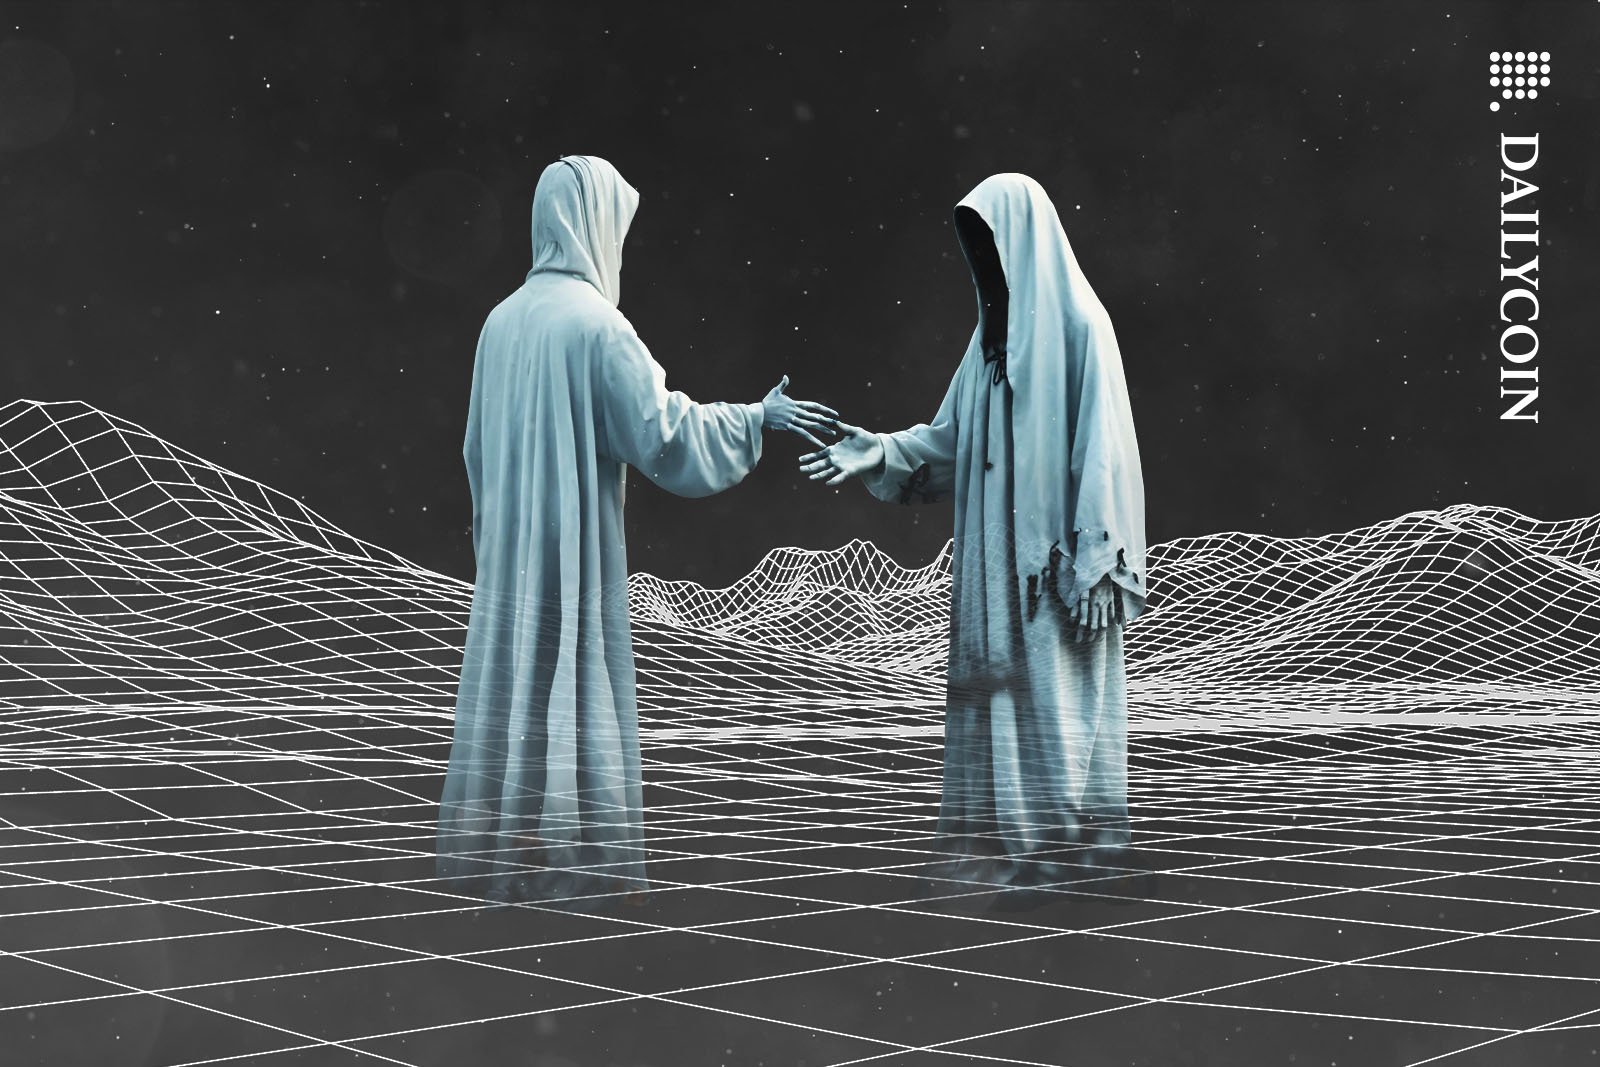 Two ghosts shaking hand in an eerie landscape.